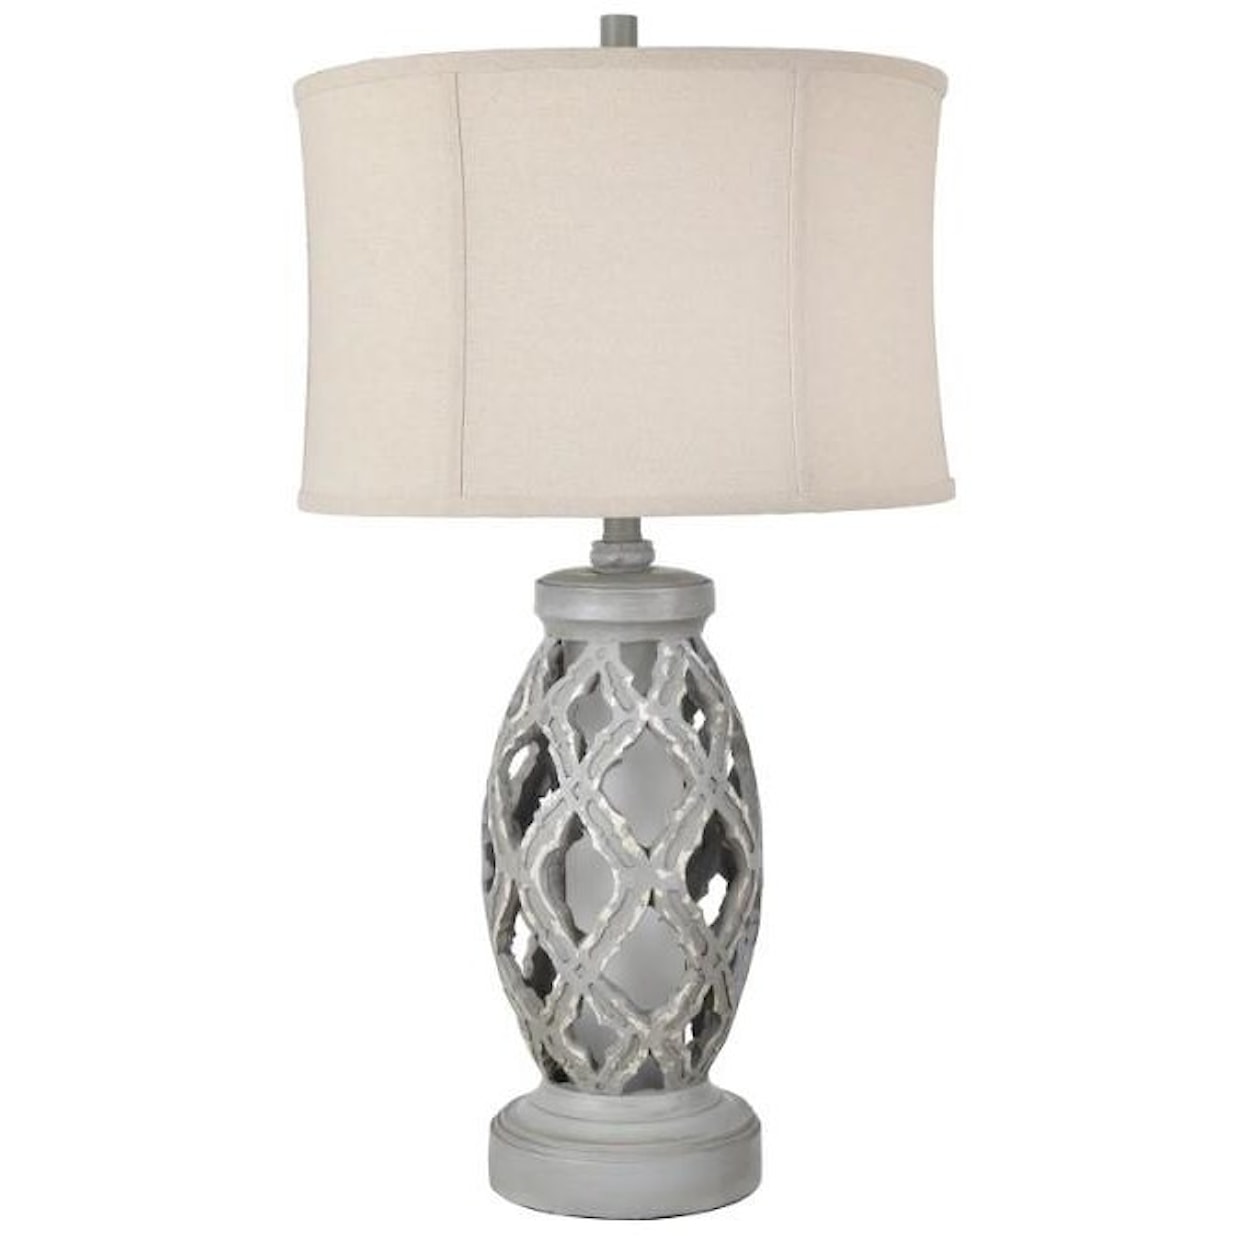 Crestview Collection Lighting Gaborone Table Lamp with Night Light